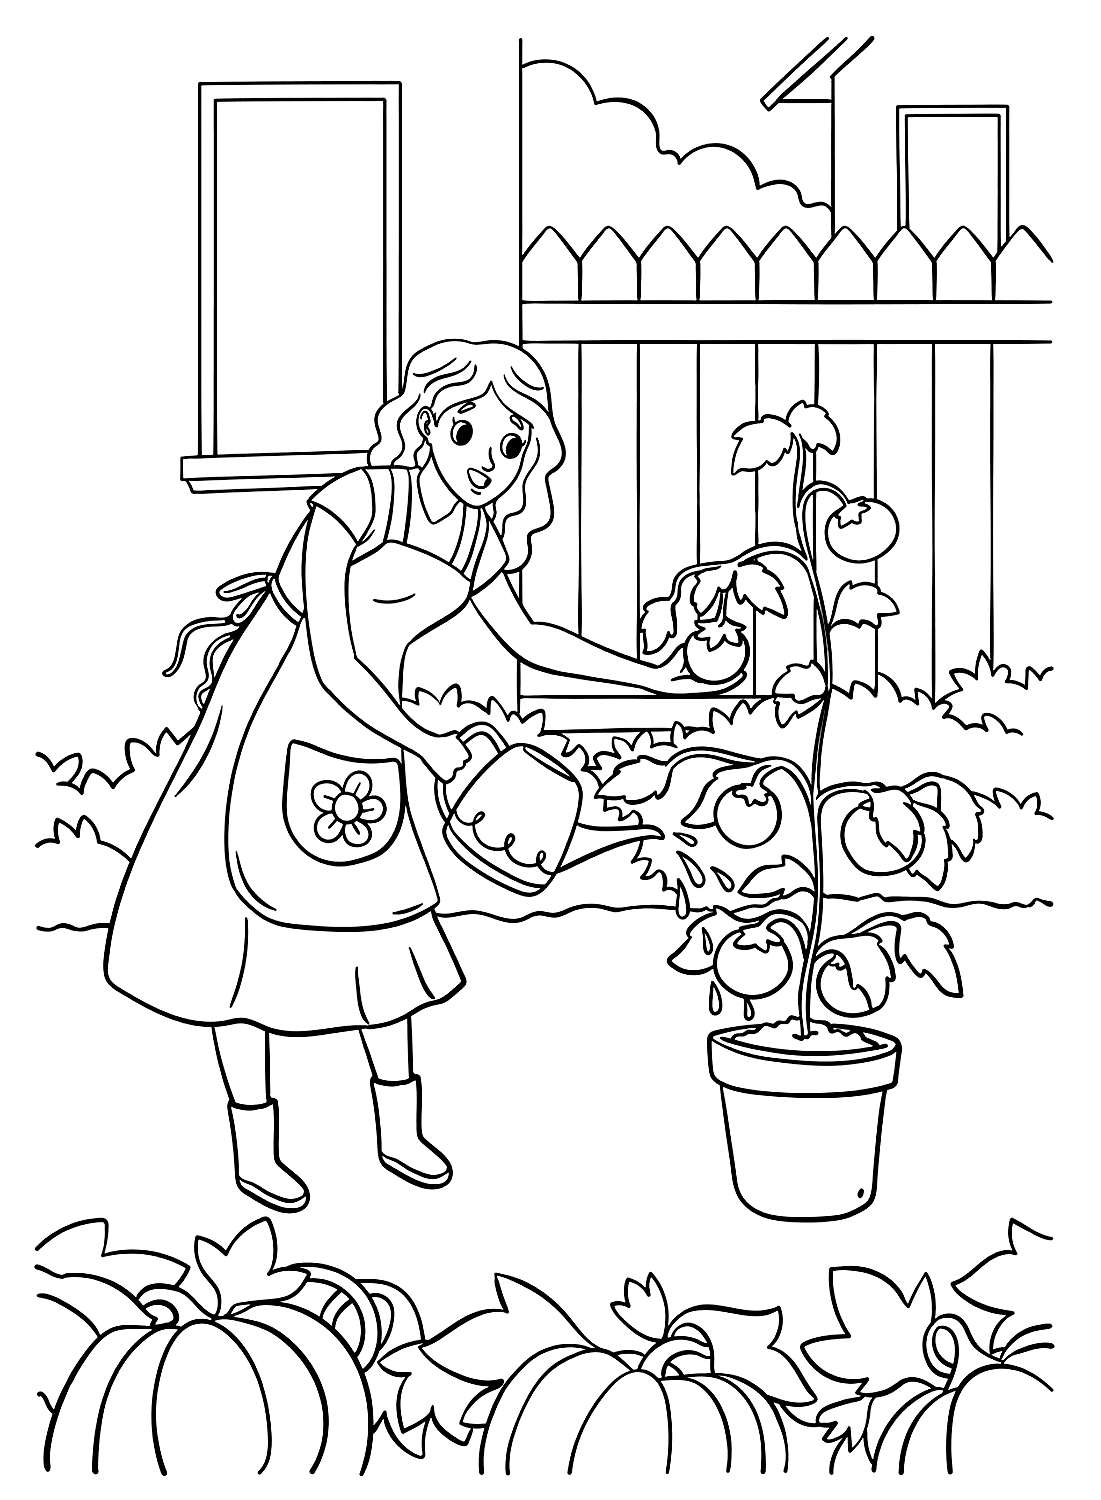 Garden coloring page to print